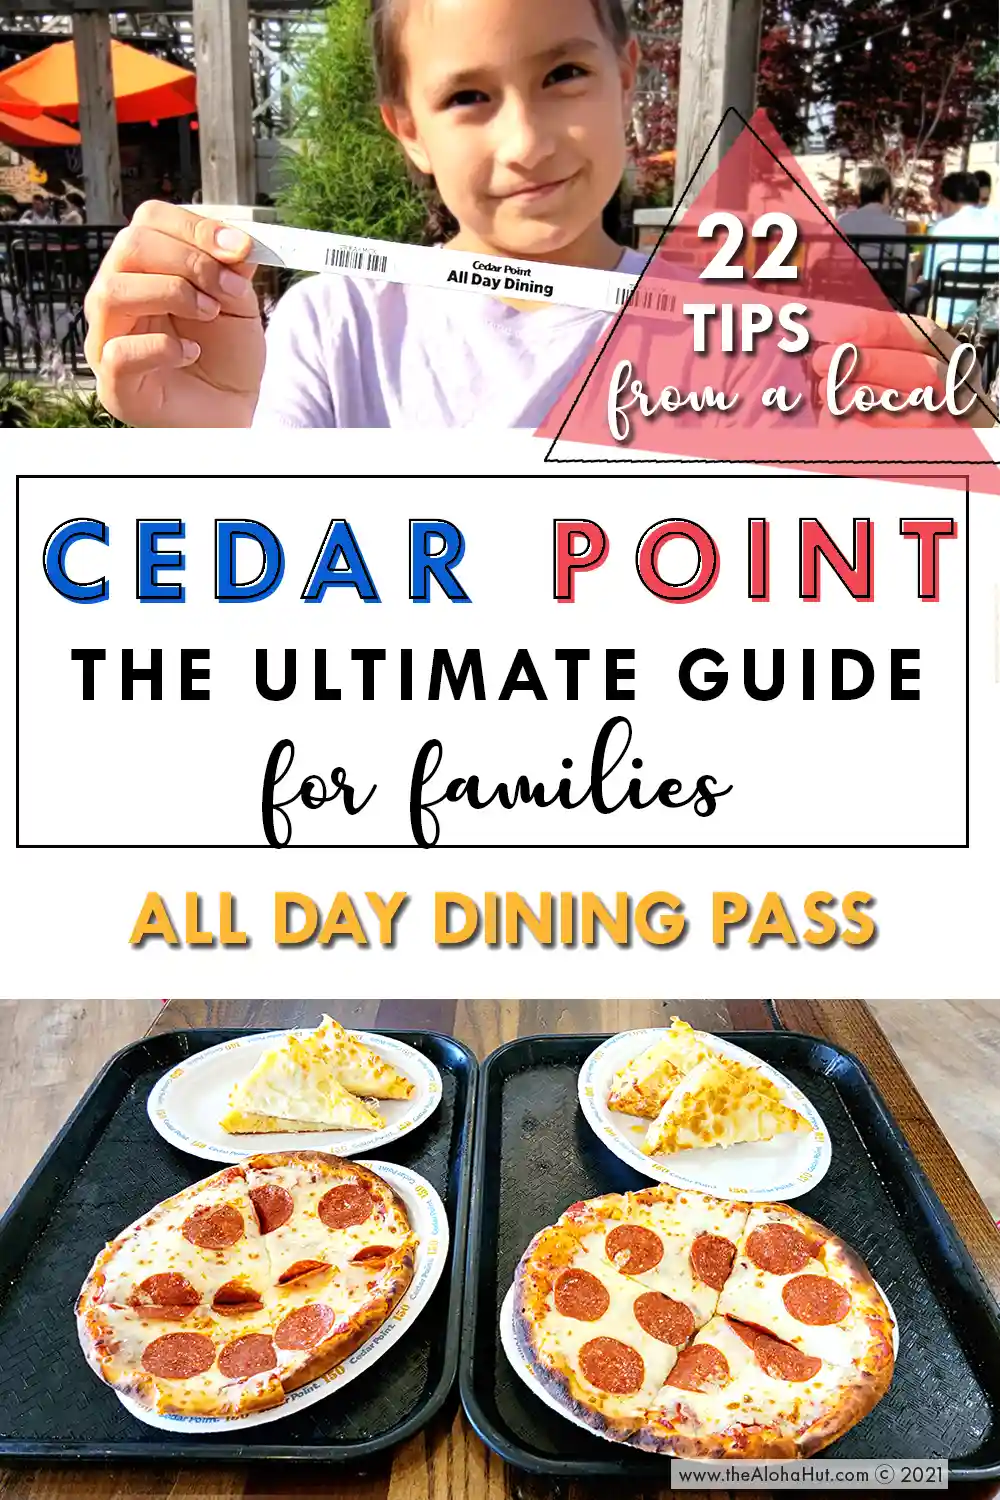 Cedar Point the Ultimate Guide for Families - Tips & Tricks - all day dining food pass